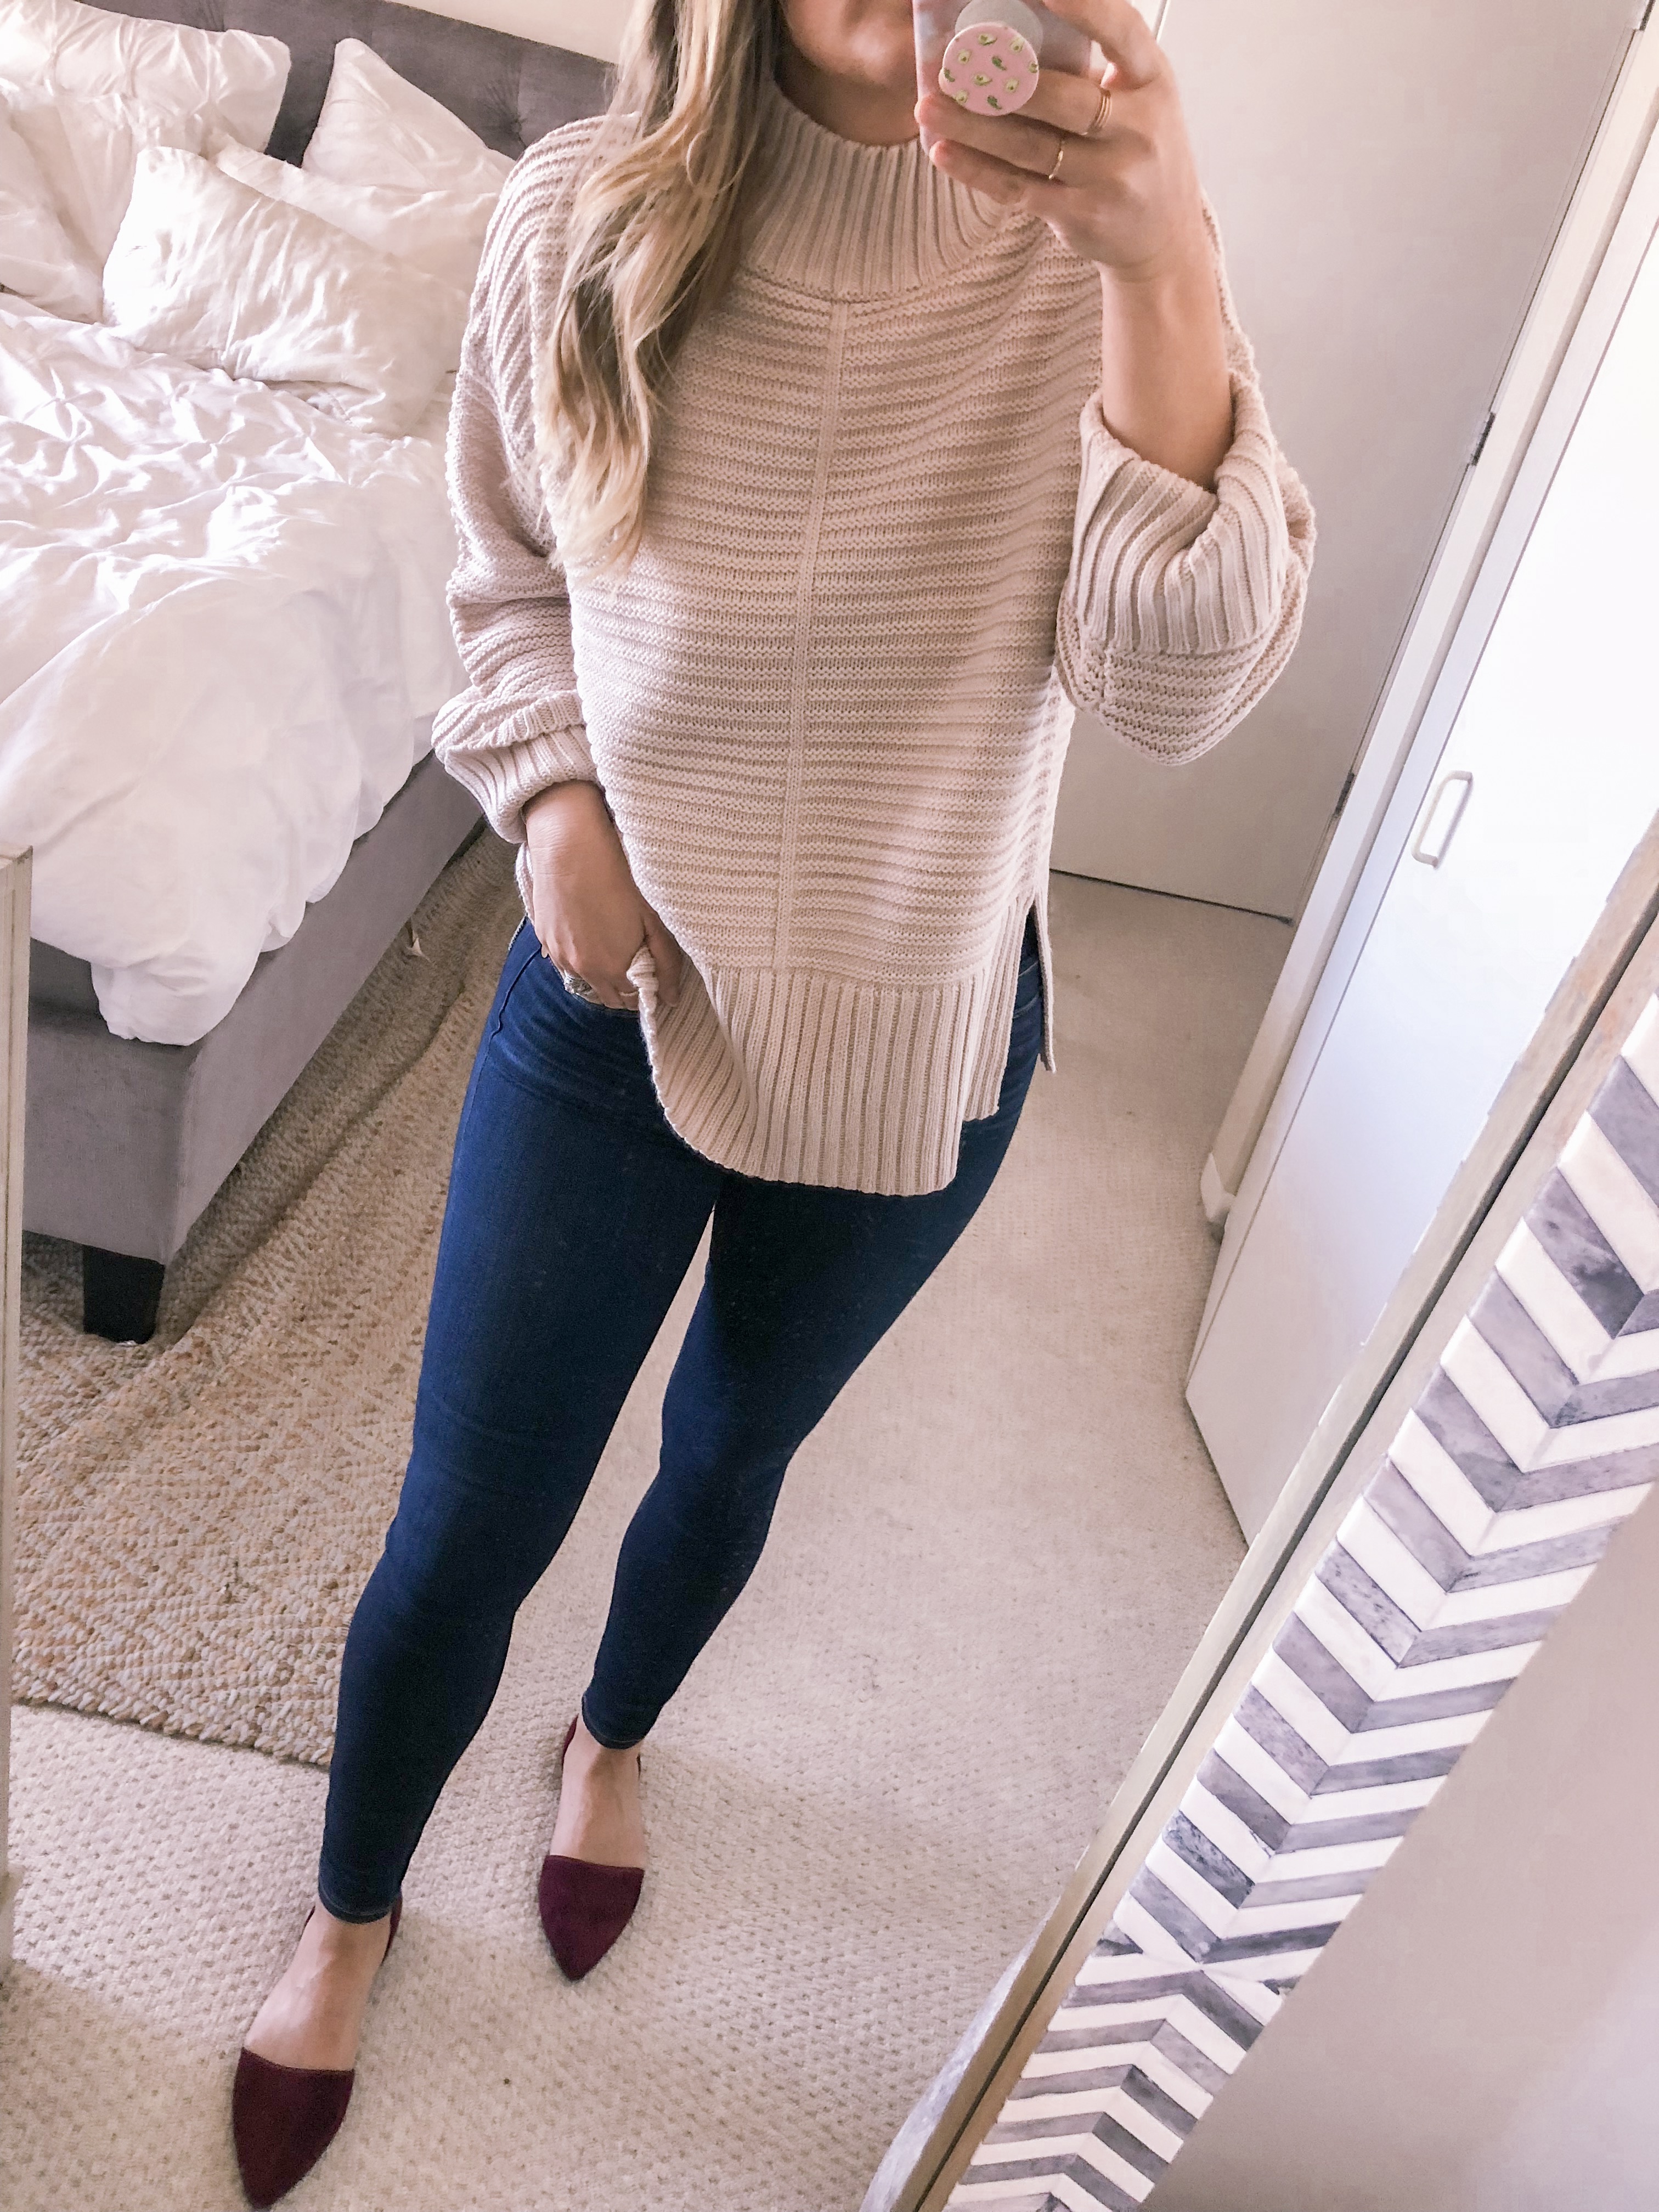 Chicago style blogger Visions of Vogue wears a Topshop turtleneck sweater with burgundy flats for a fall outfit idea. 